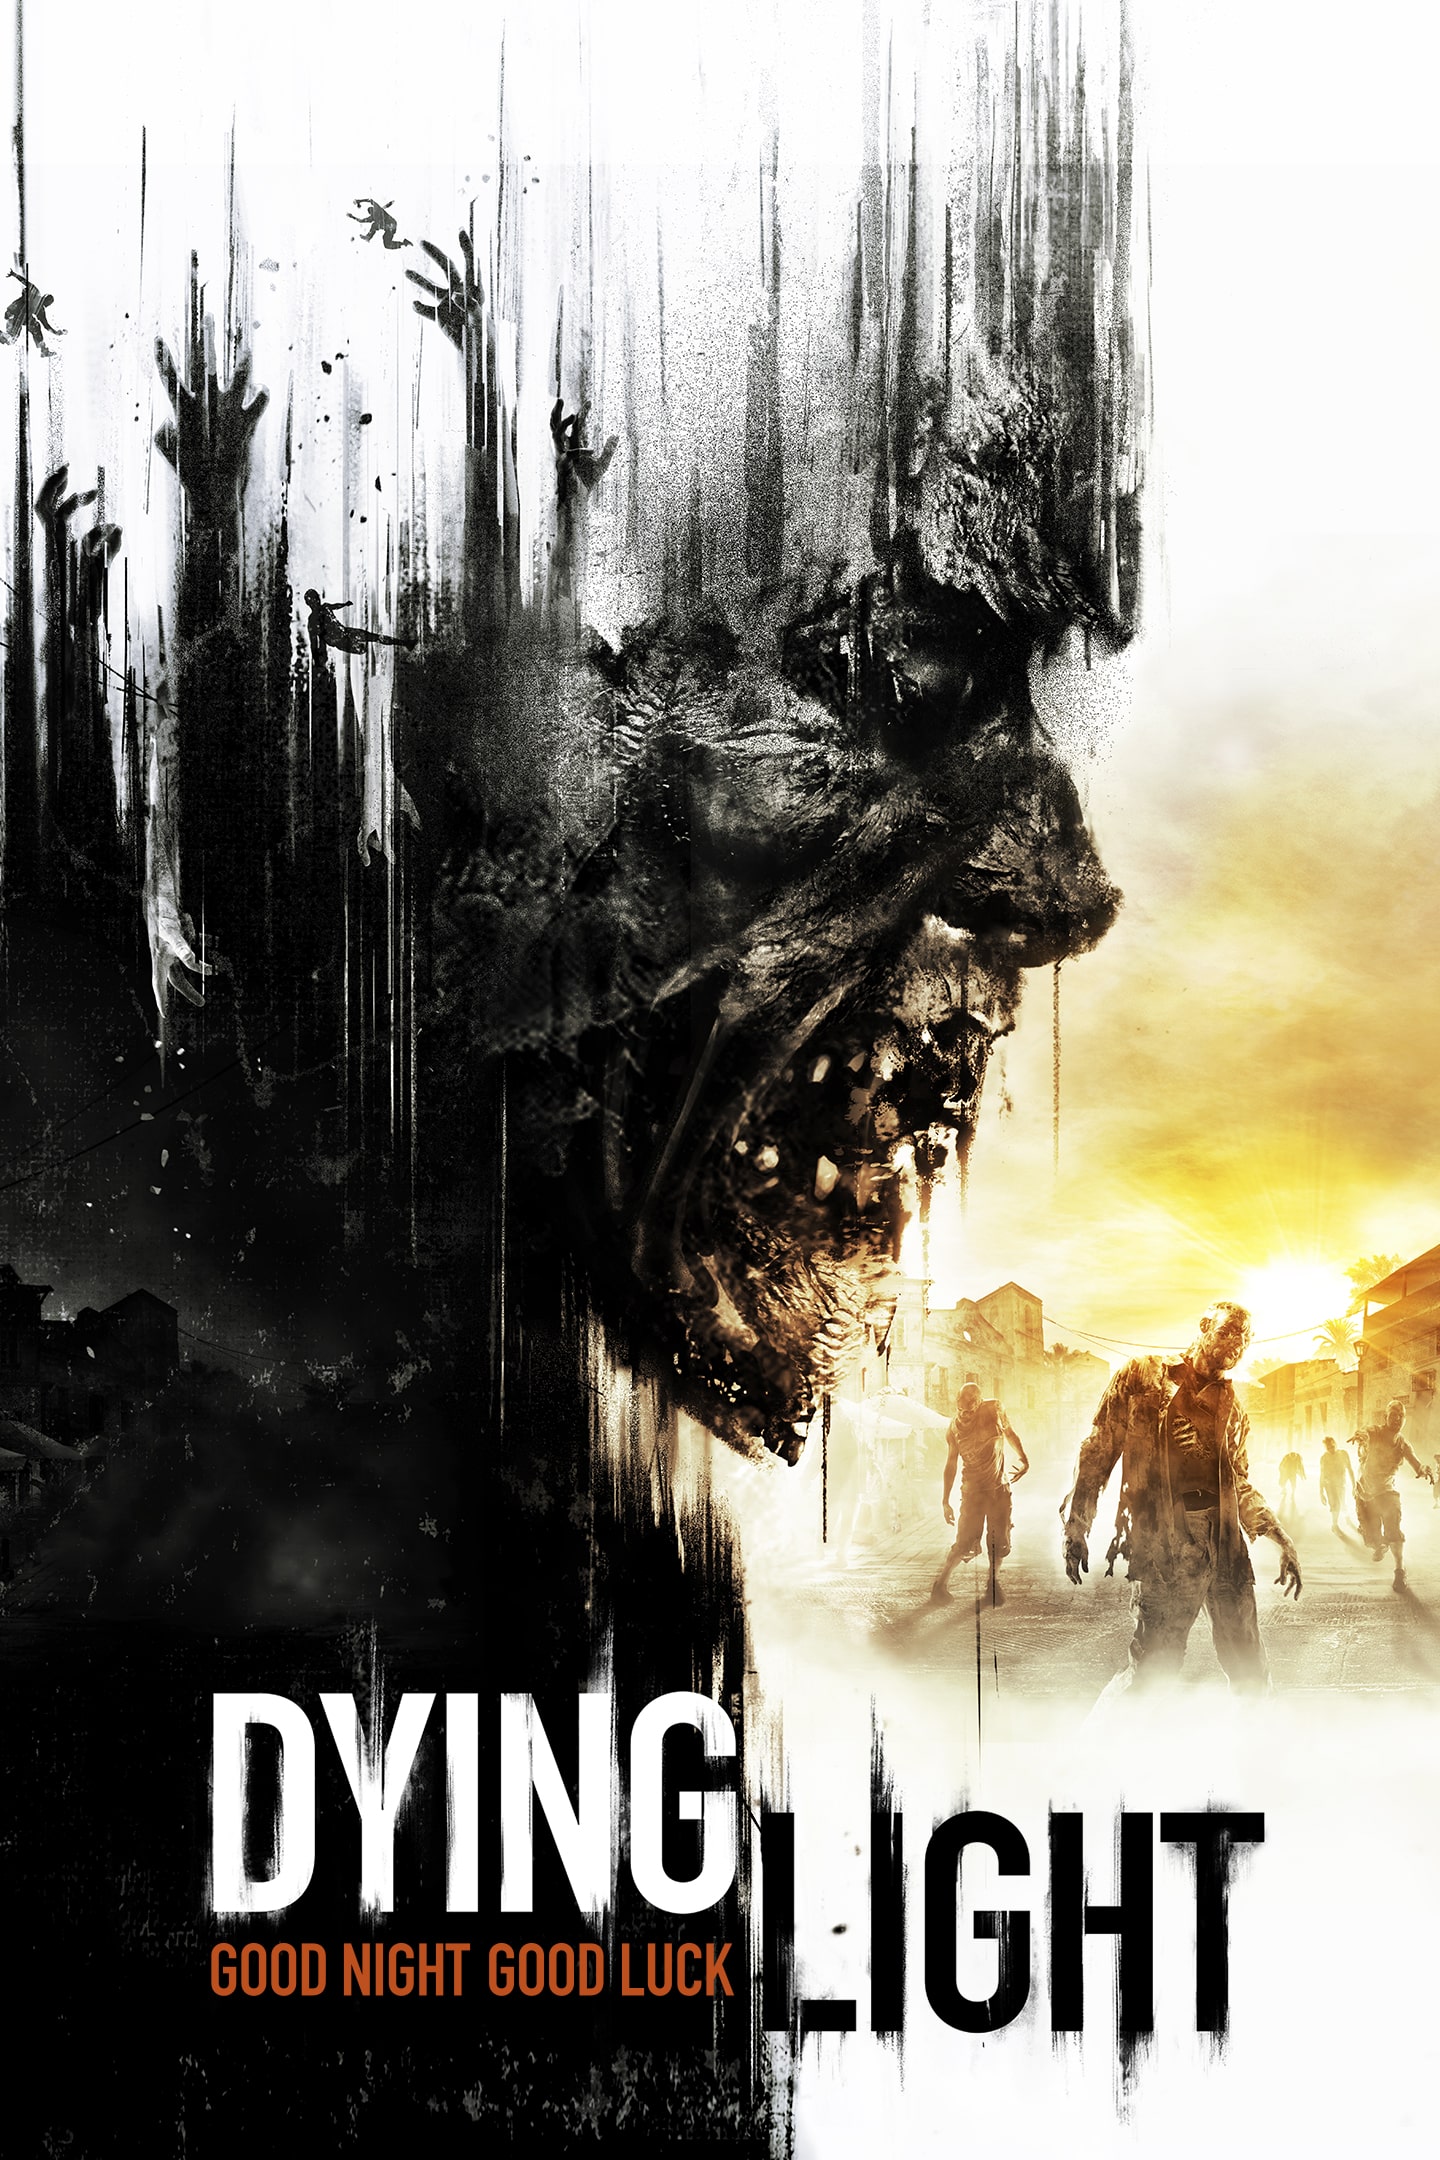 You Might Be Getting Dying Light: The Following Enhanced Edition